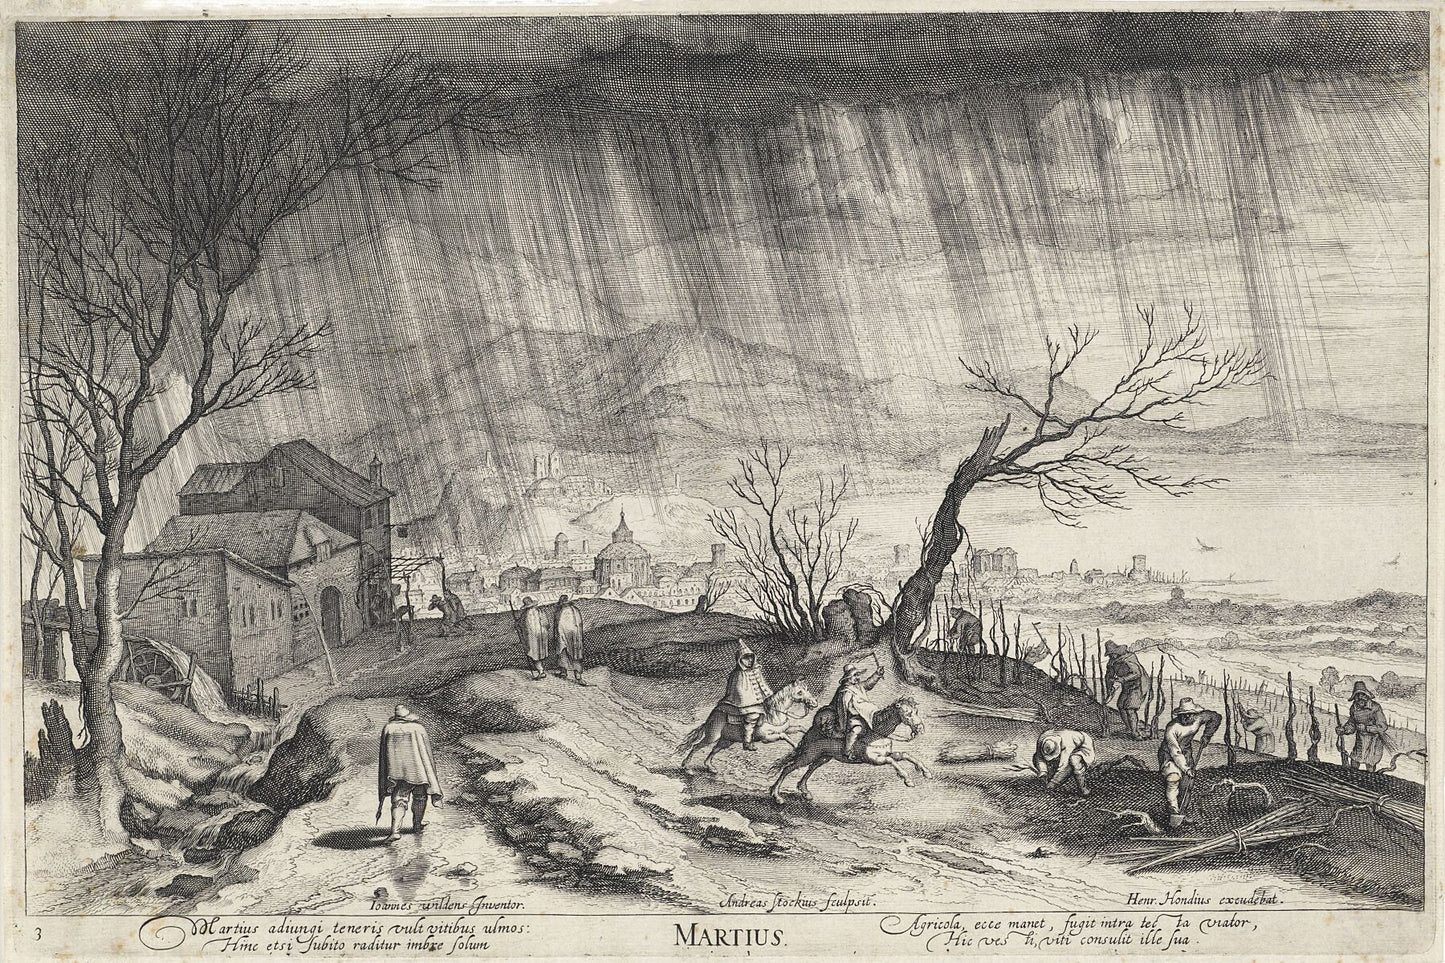 March, landscape with a rain shower, Andries Jacobsz. Stock, after Jan Wildens, 1614